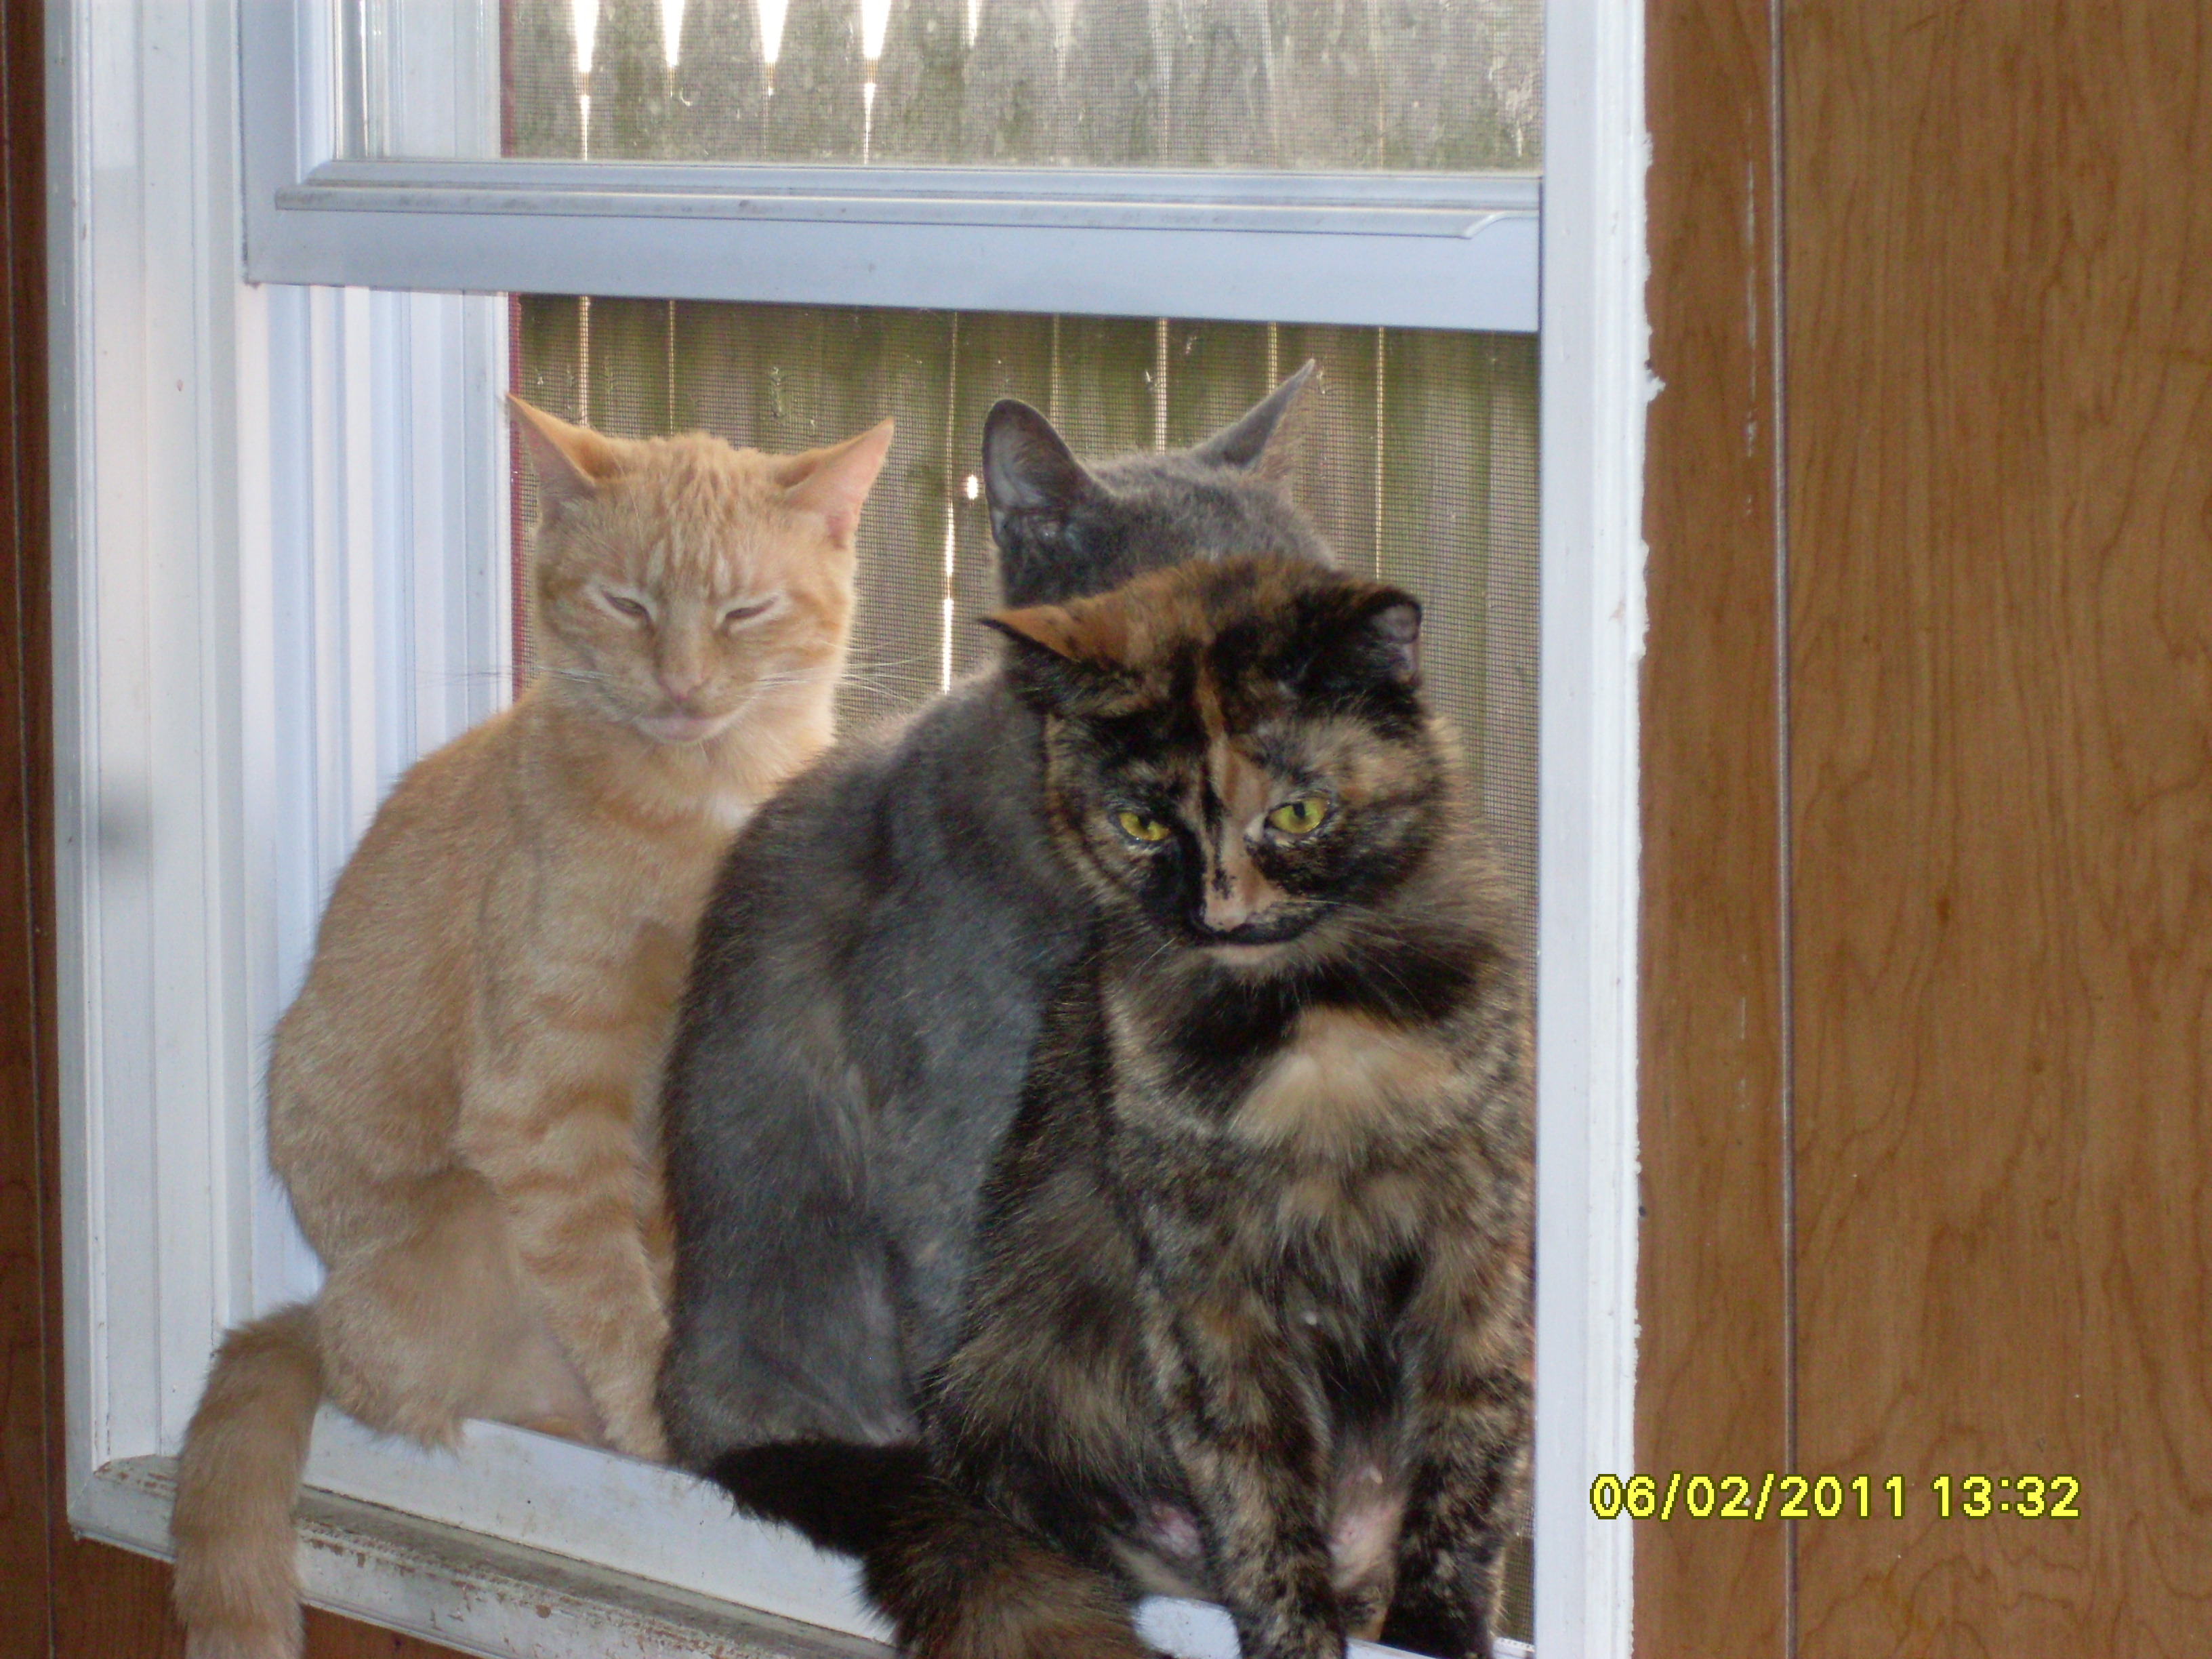 Gemini sitting in the window with two of her daughters Peanut and Olivia.